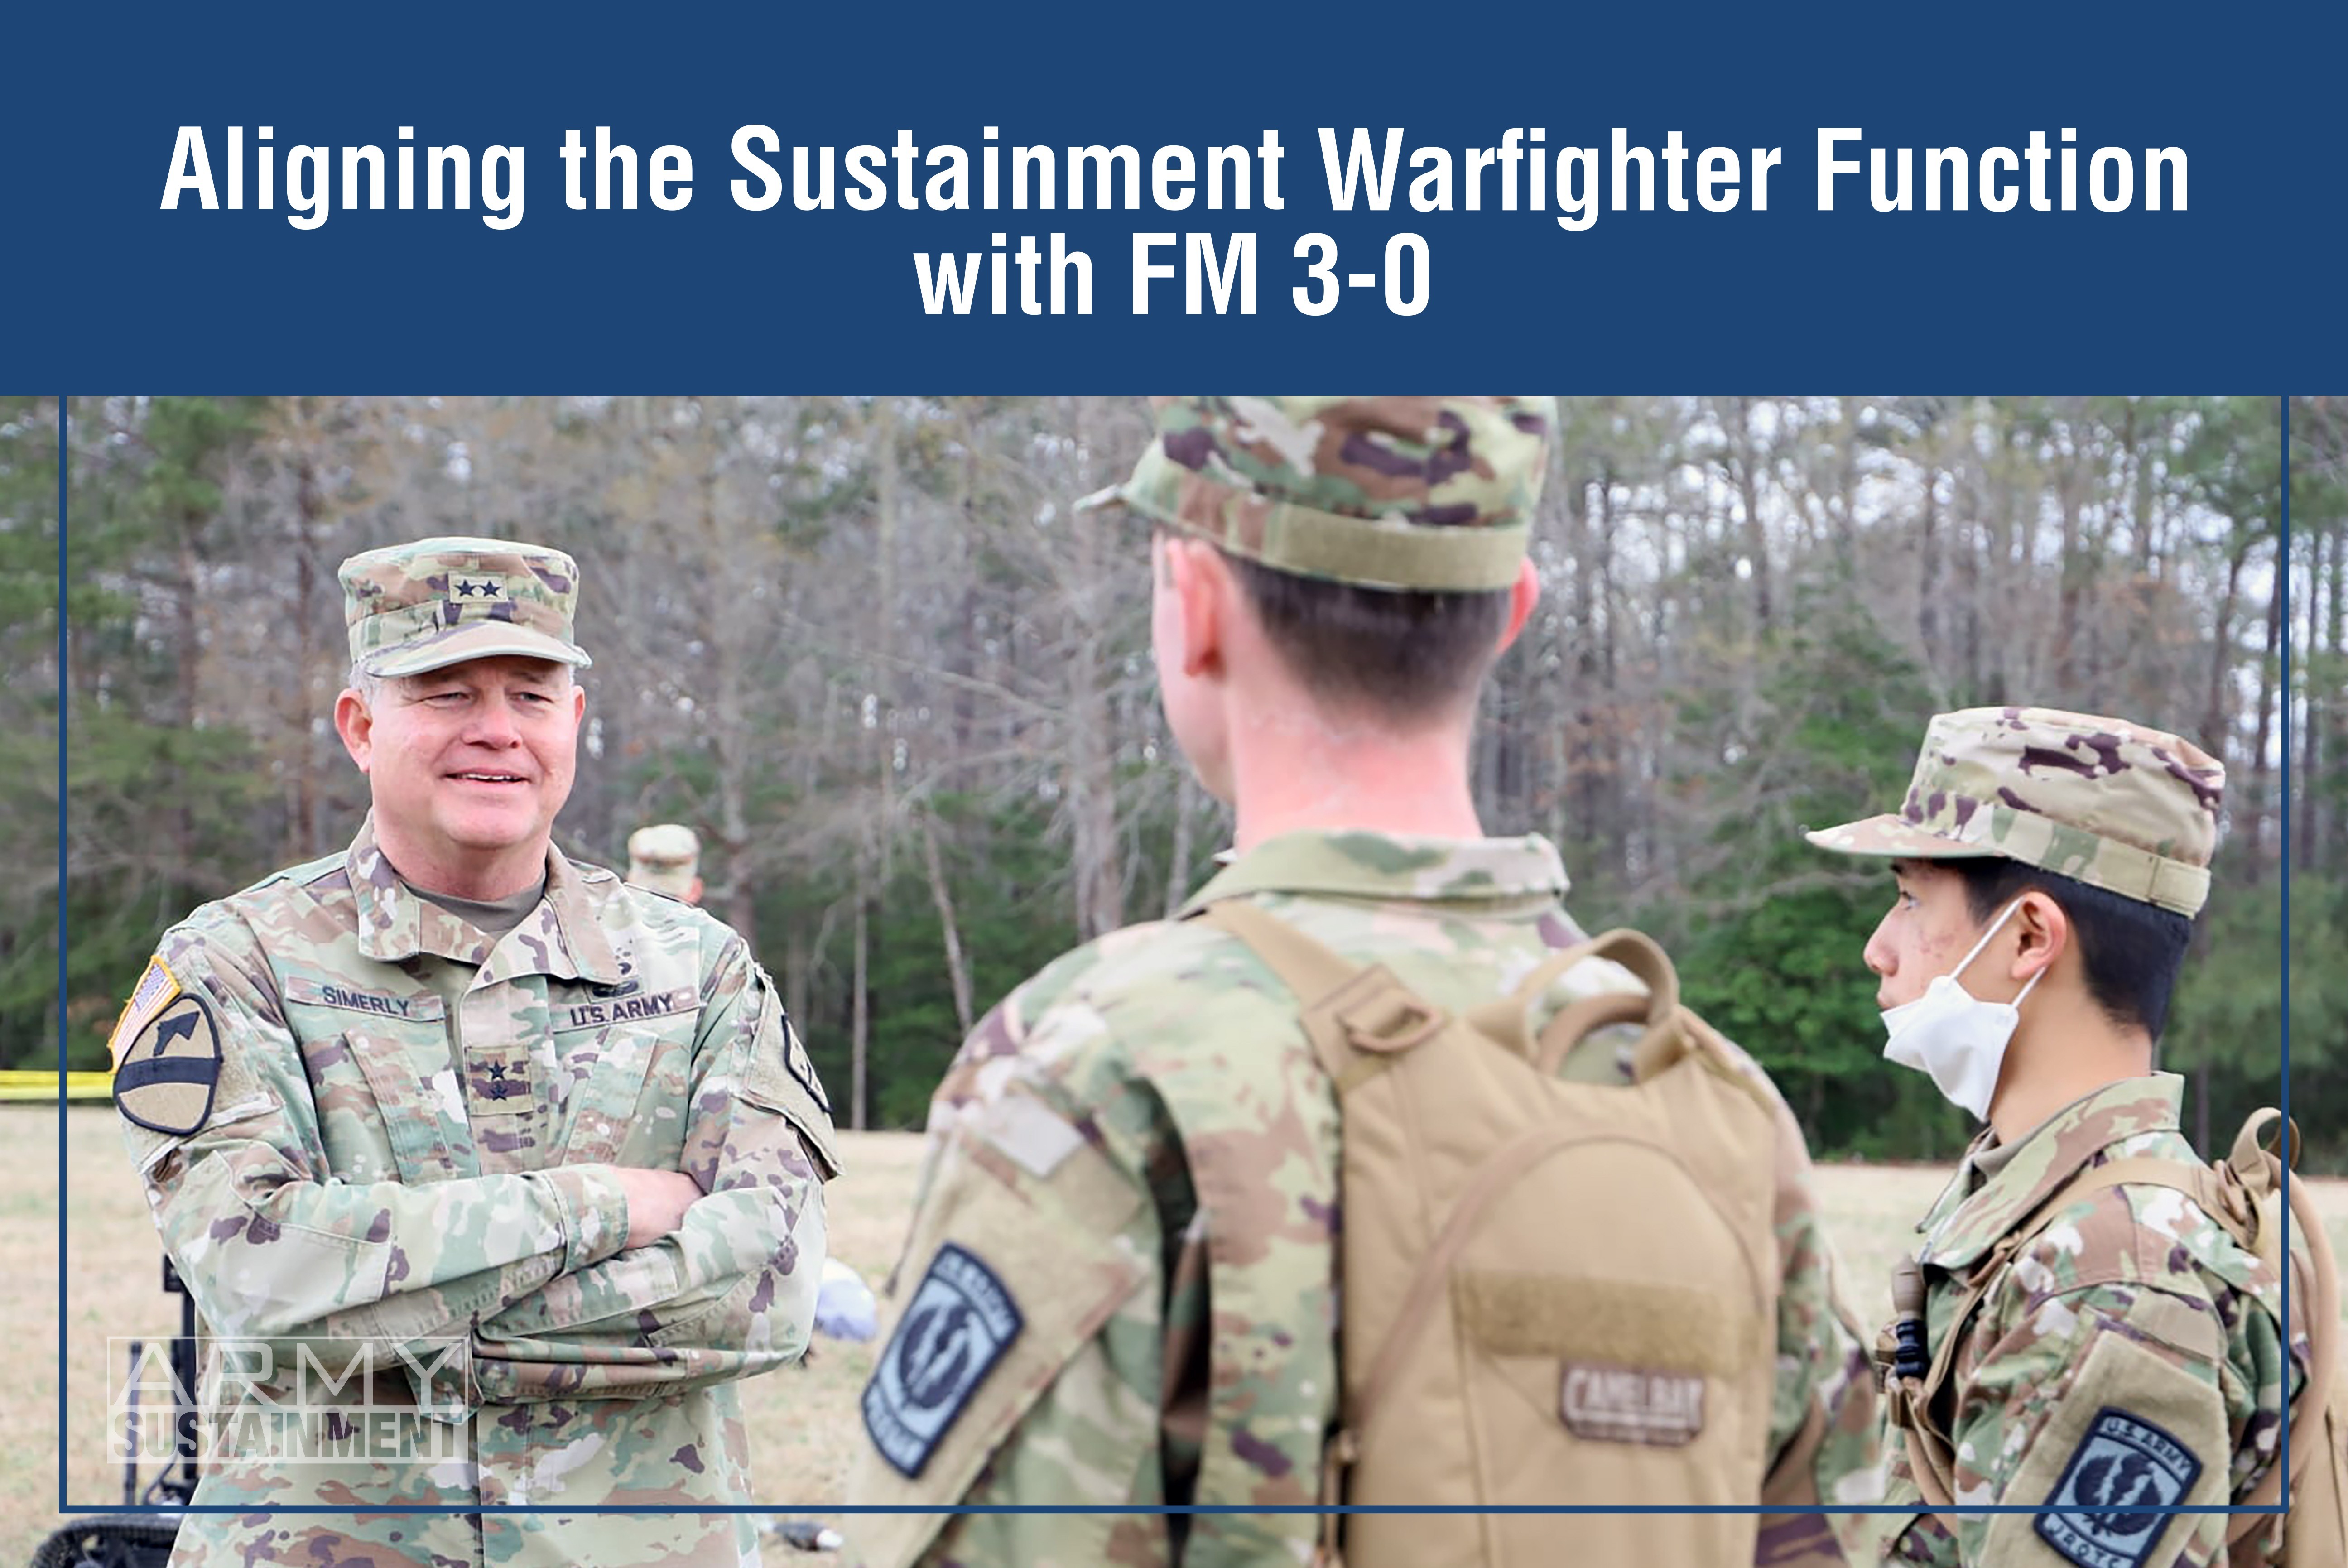 Aligning the Sustainment Warfighter Function with FM 3-0 | Article